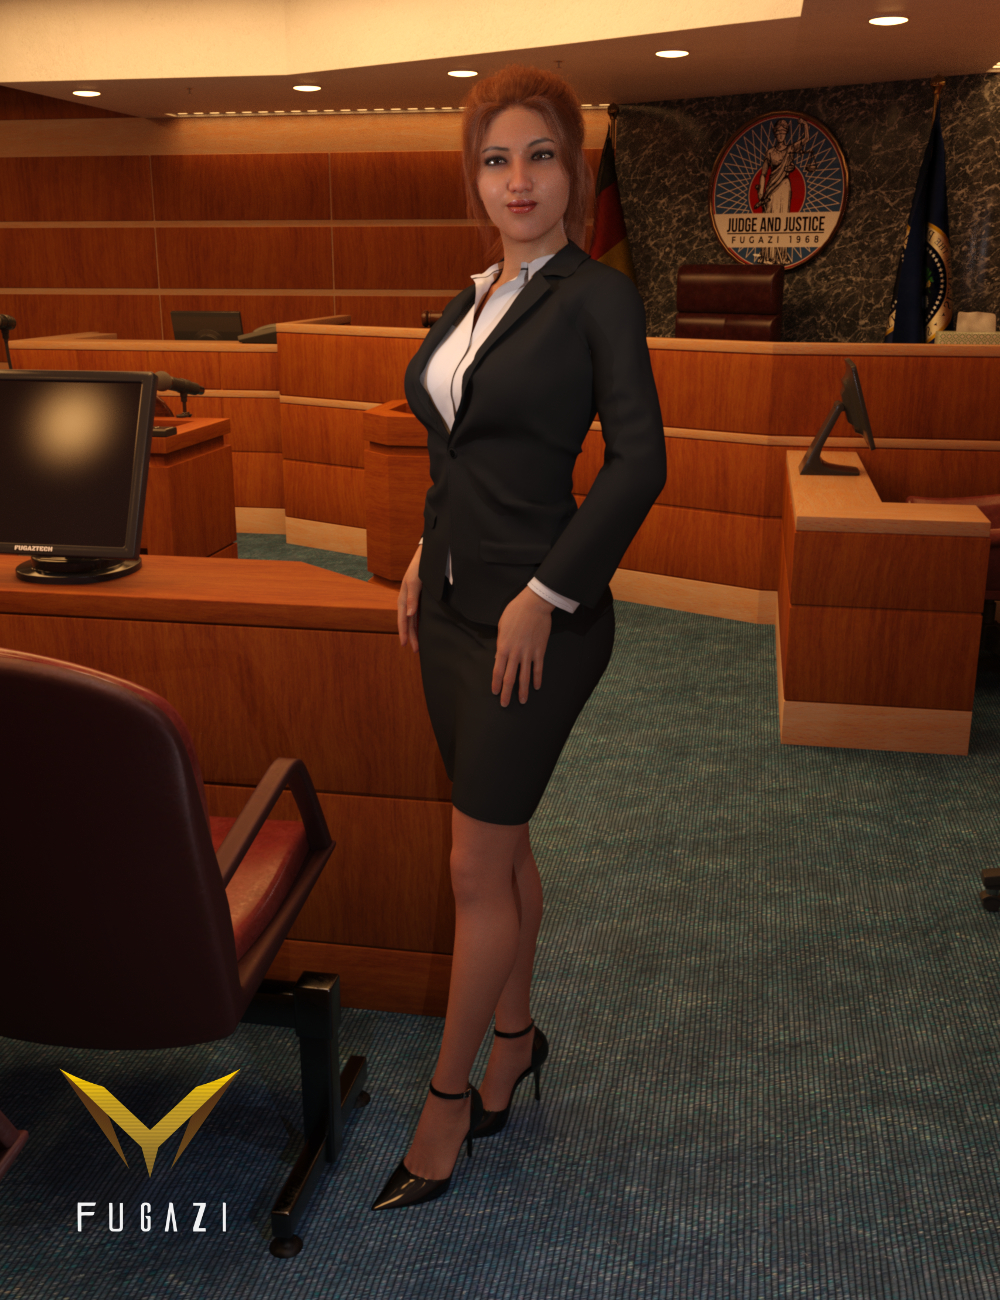 FG Legal Area Poses by: IronmanFugazi1968, 3D Models by Daz 3D